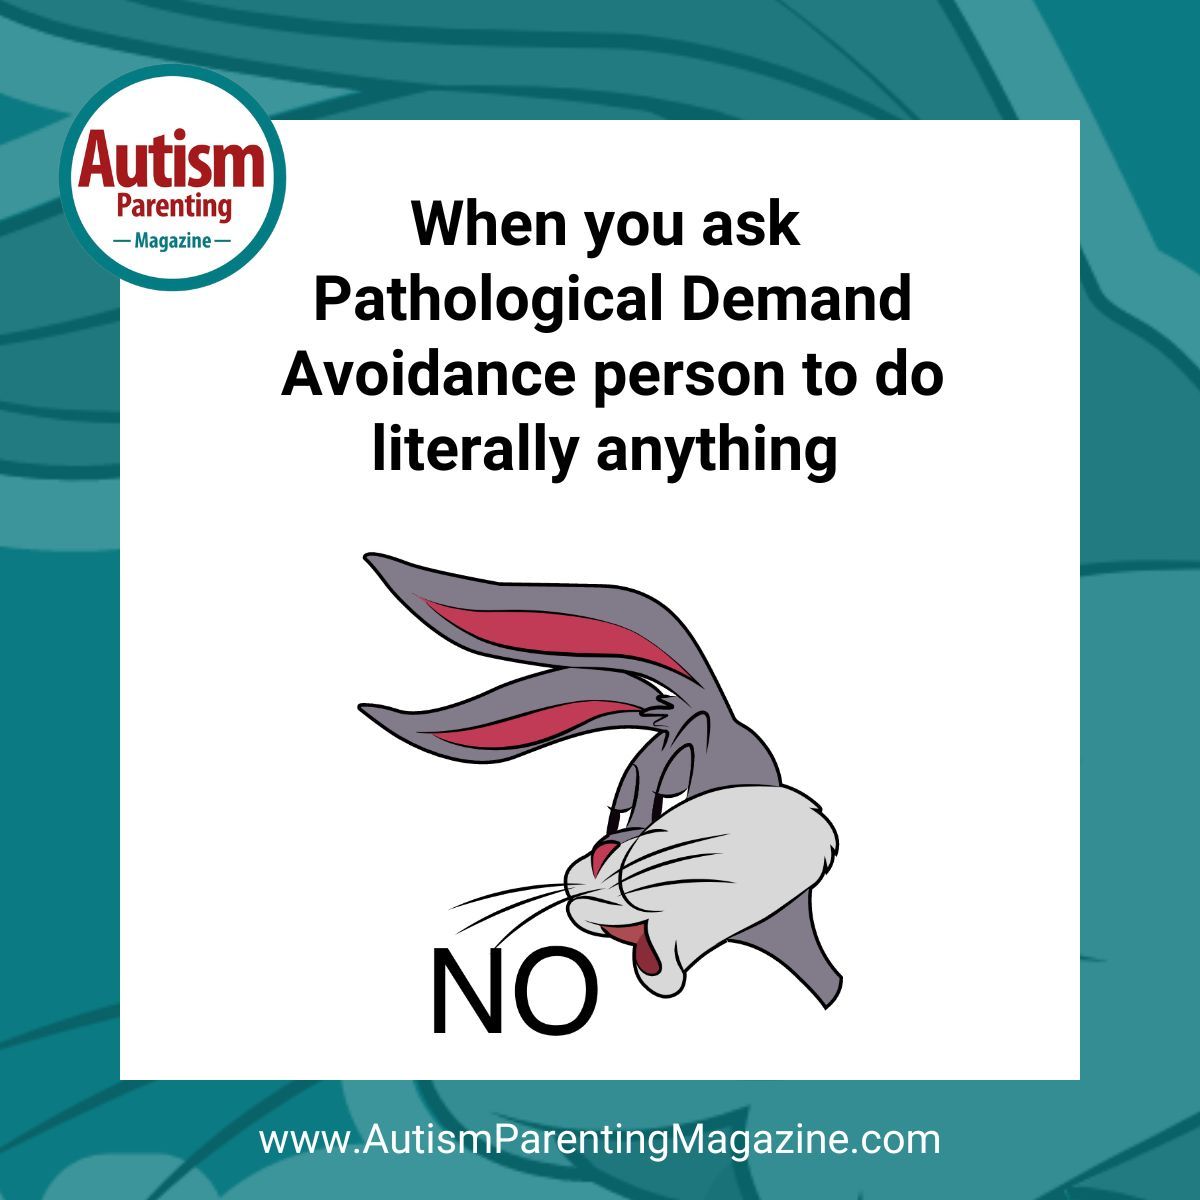 Are you confused by your child’s behavior? Do they say no to simple requests? Join our FREE live webinar on 'Pathological Demand Avoidance' with Dr. Brett J. Novick on April 10. Visit the link buff.ly/3VOFOEK